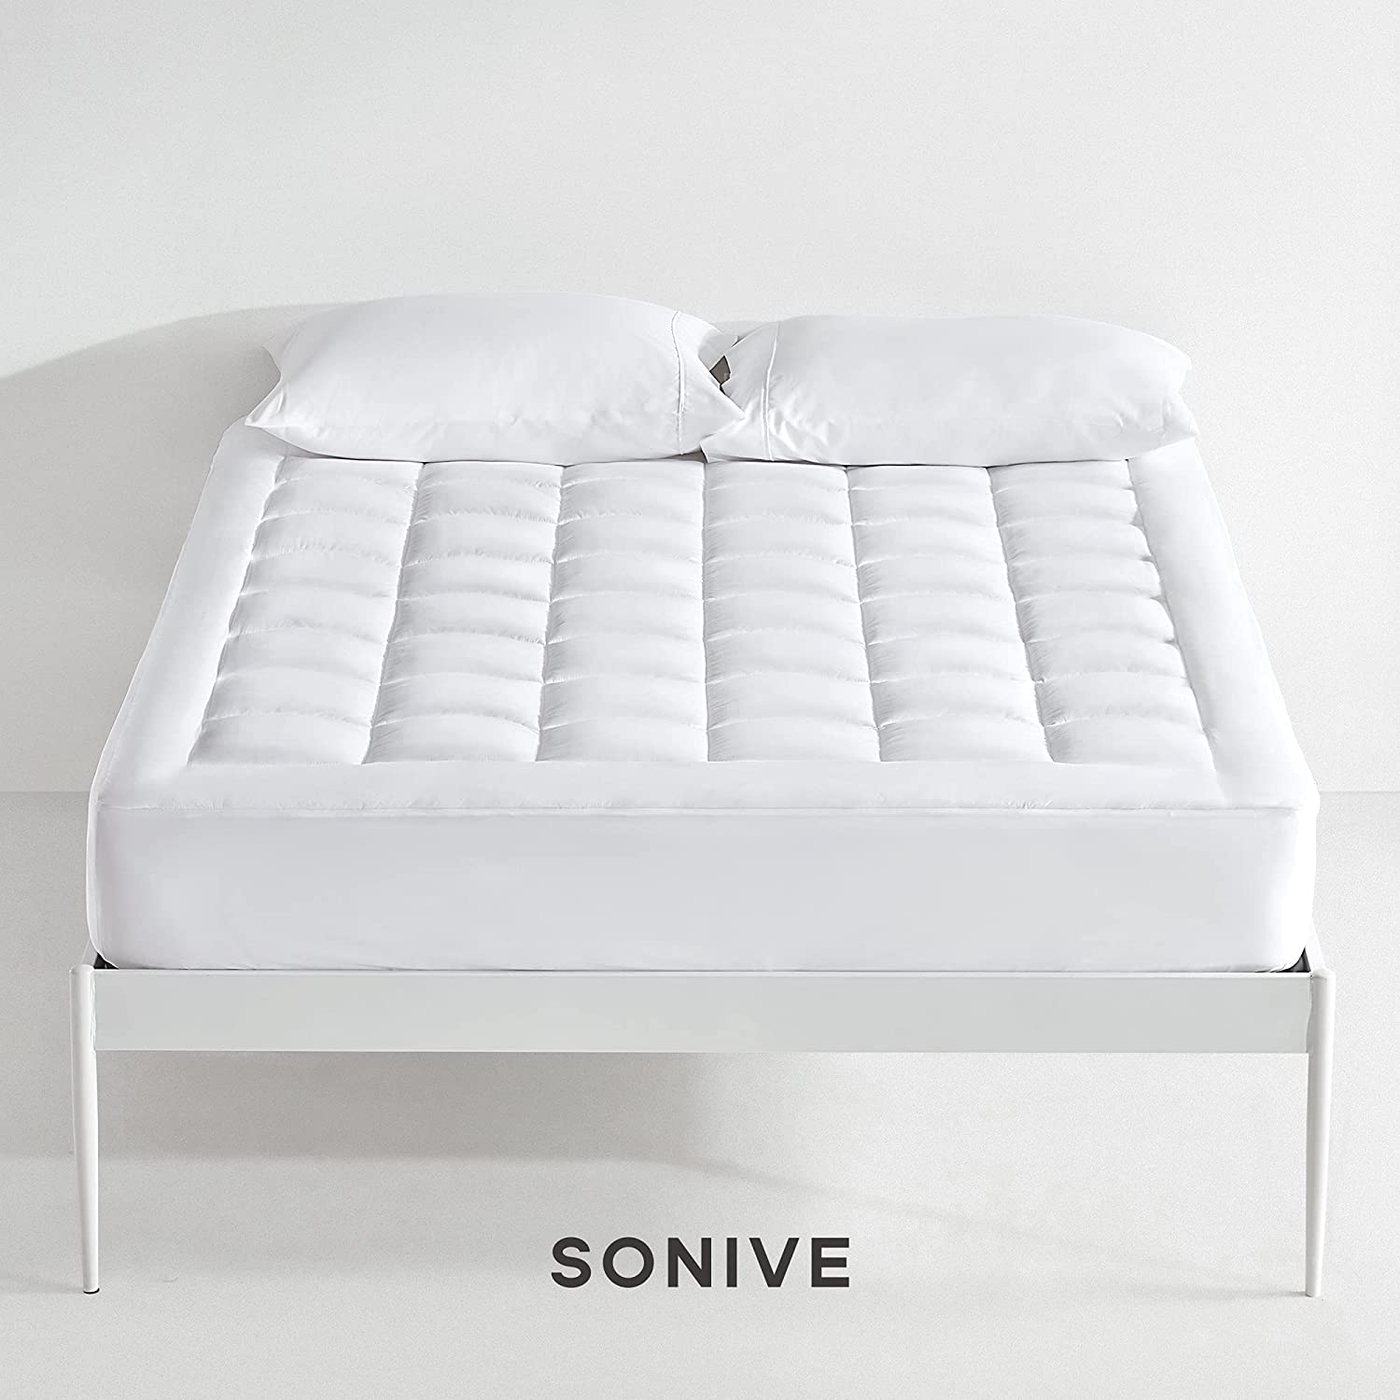 SONIVE Quilted Mattress Pad Soft Fluffy Pillow Top Mattress Cover Down Alternative Fill Topper Streches up to 21 Inches Deep Pocket (White, King)